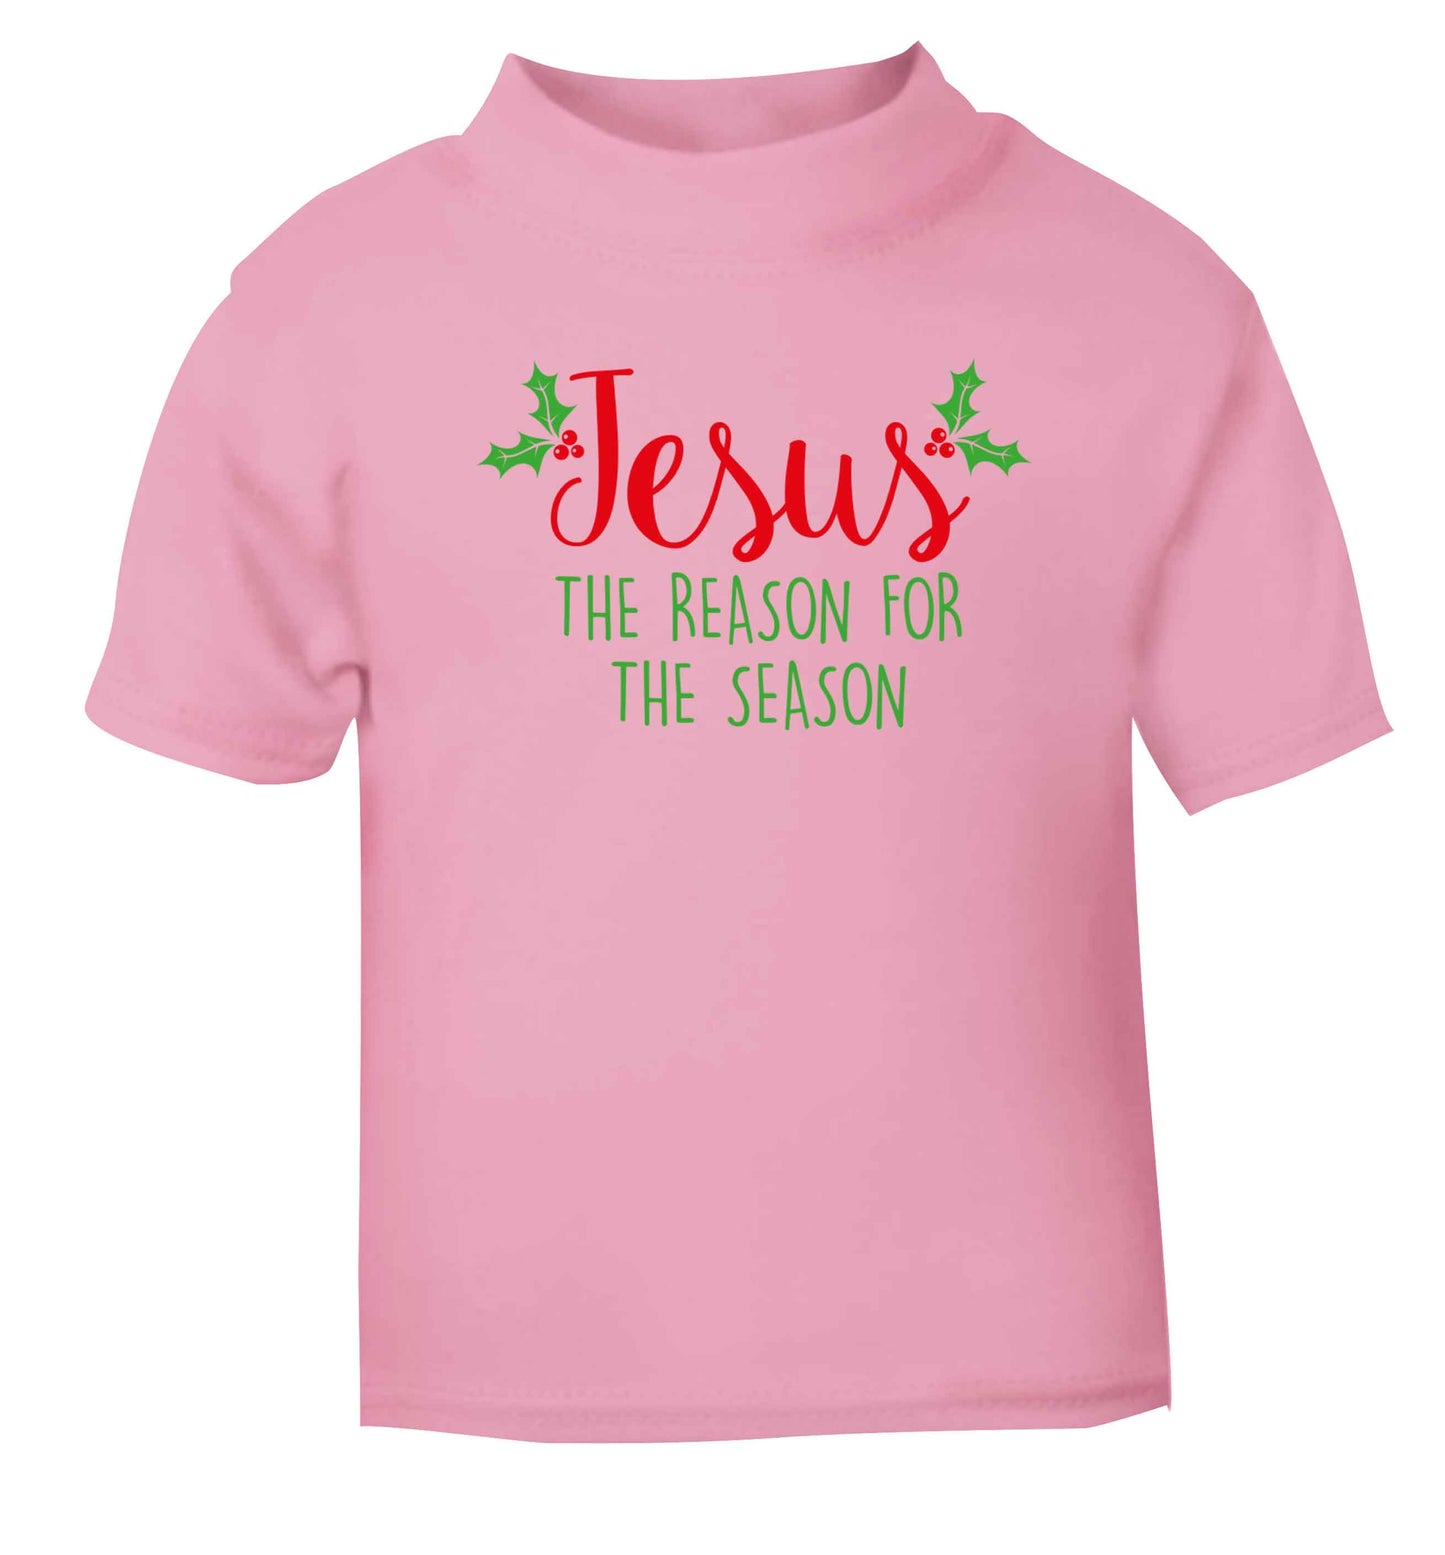 Jesus the reason for the season light pink baby toddler Tshirt 2 Years